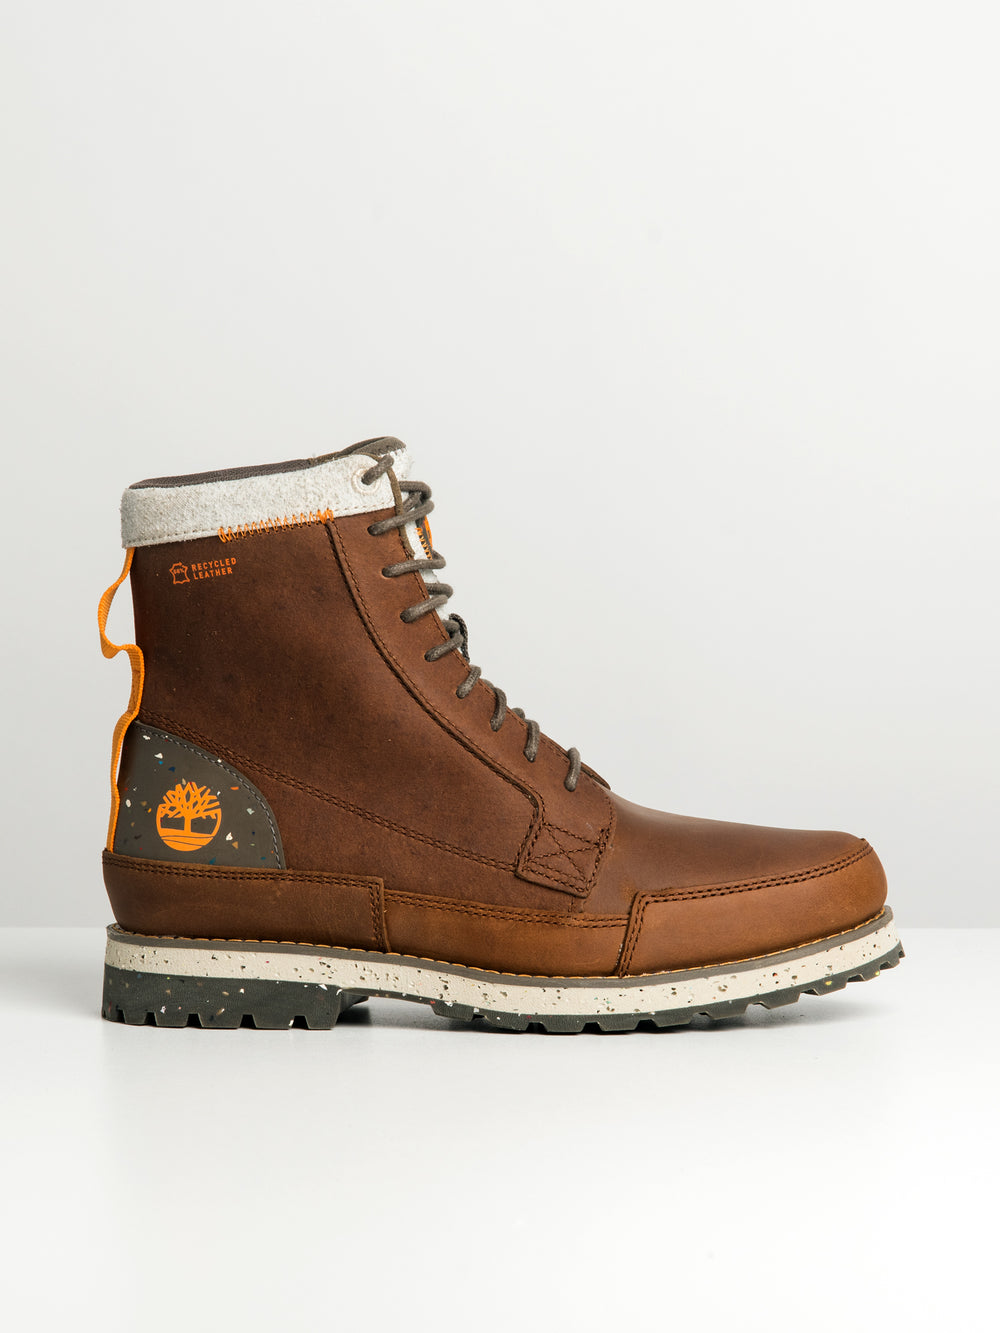 MENS TIMBERLAND TIMBERCYCLE BOOT - CLEARANCE